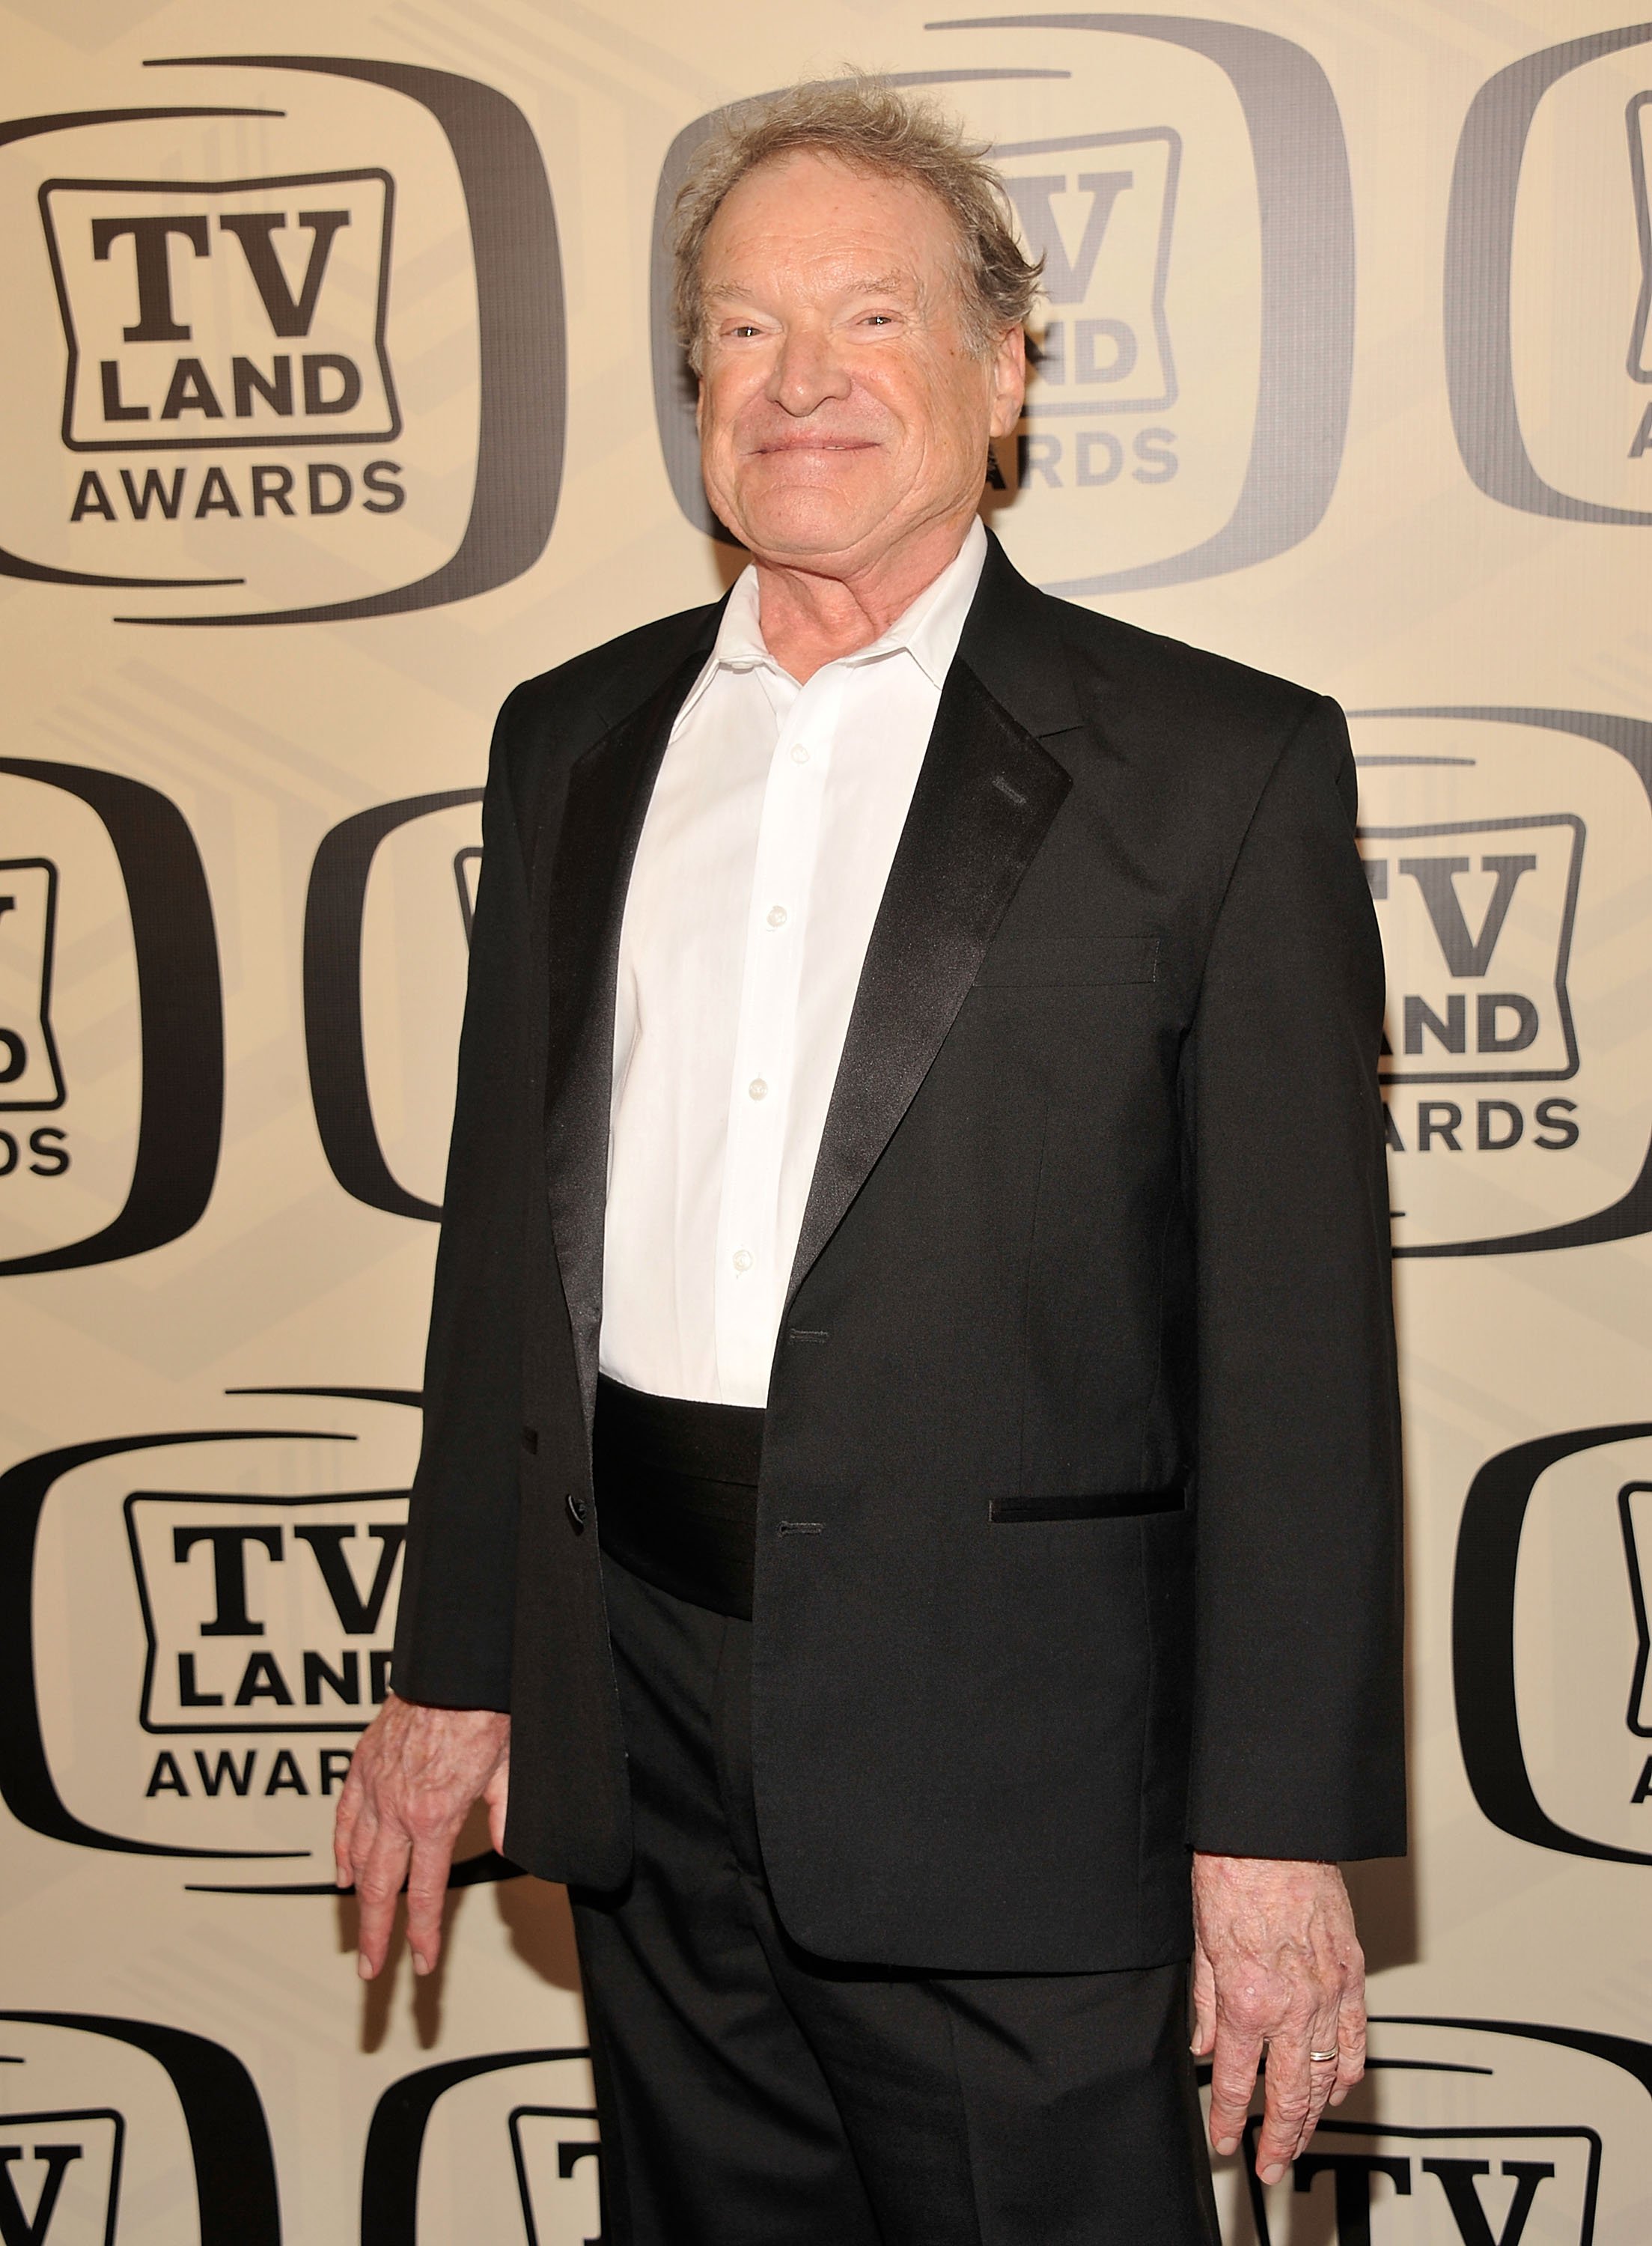 Charles Kimbrough attends the 10th Annual TV Land Awards at the Lexington Avenue Armory on April 14, 2012, in New York City. | Source: Getty Images.